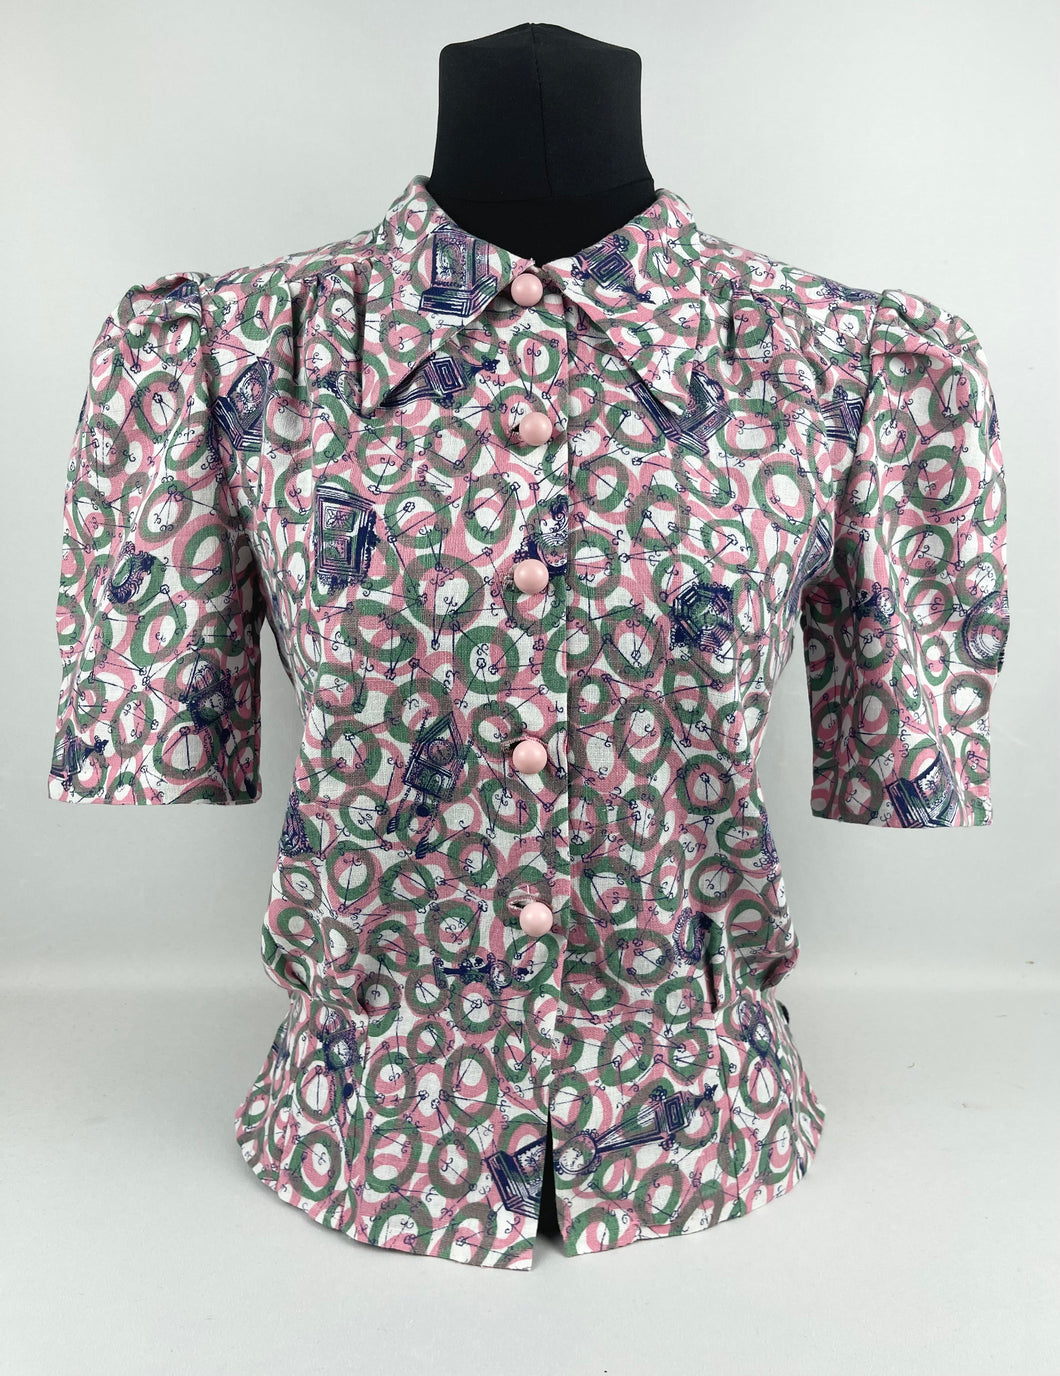 1940's Reproduction Novelty Print Blouse with Clocks and Clock Hands with Spherical Pink Buttons Made From an Original 1940's Feed Sack - Bust 34